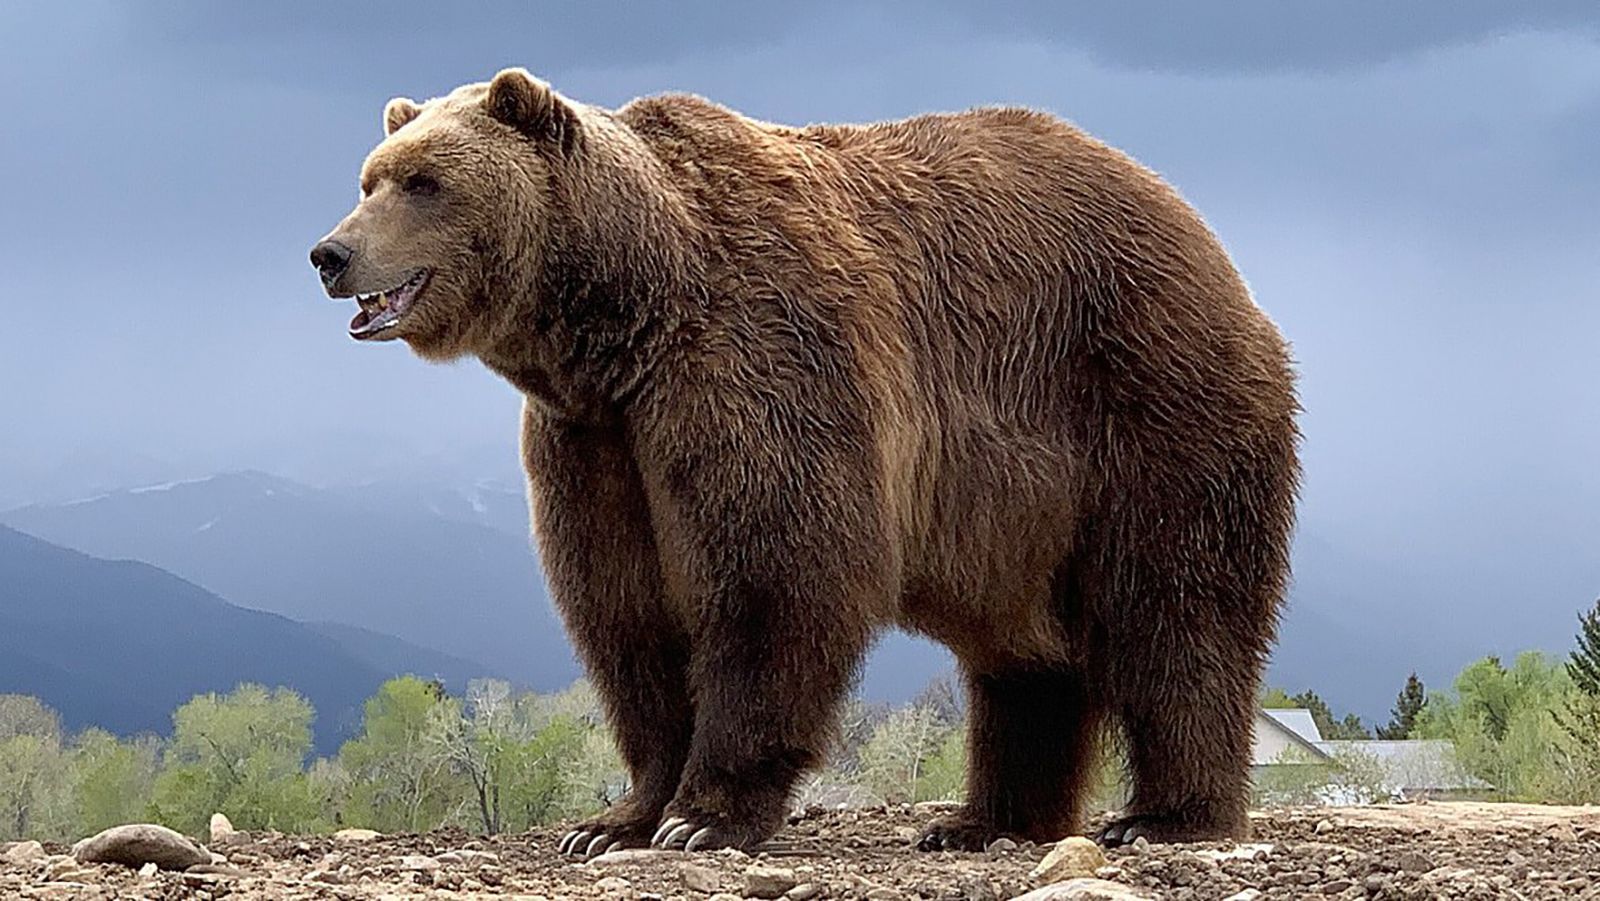 How Tall is a Grizzly Bear Standing Up